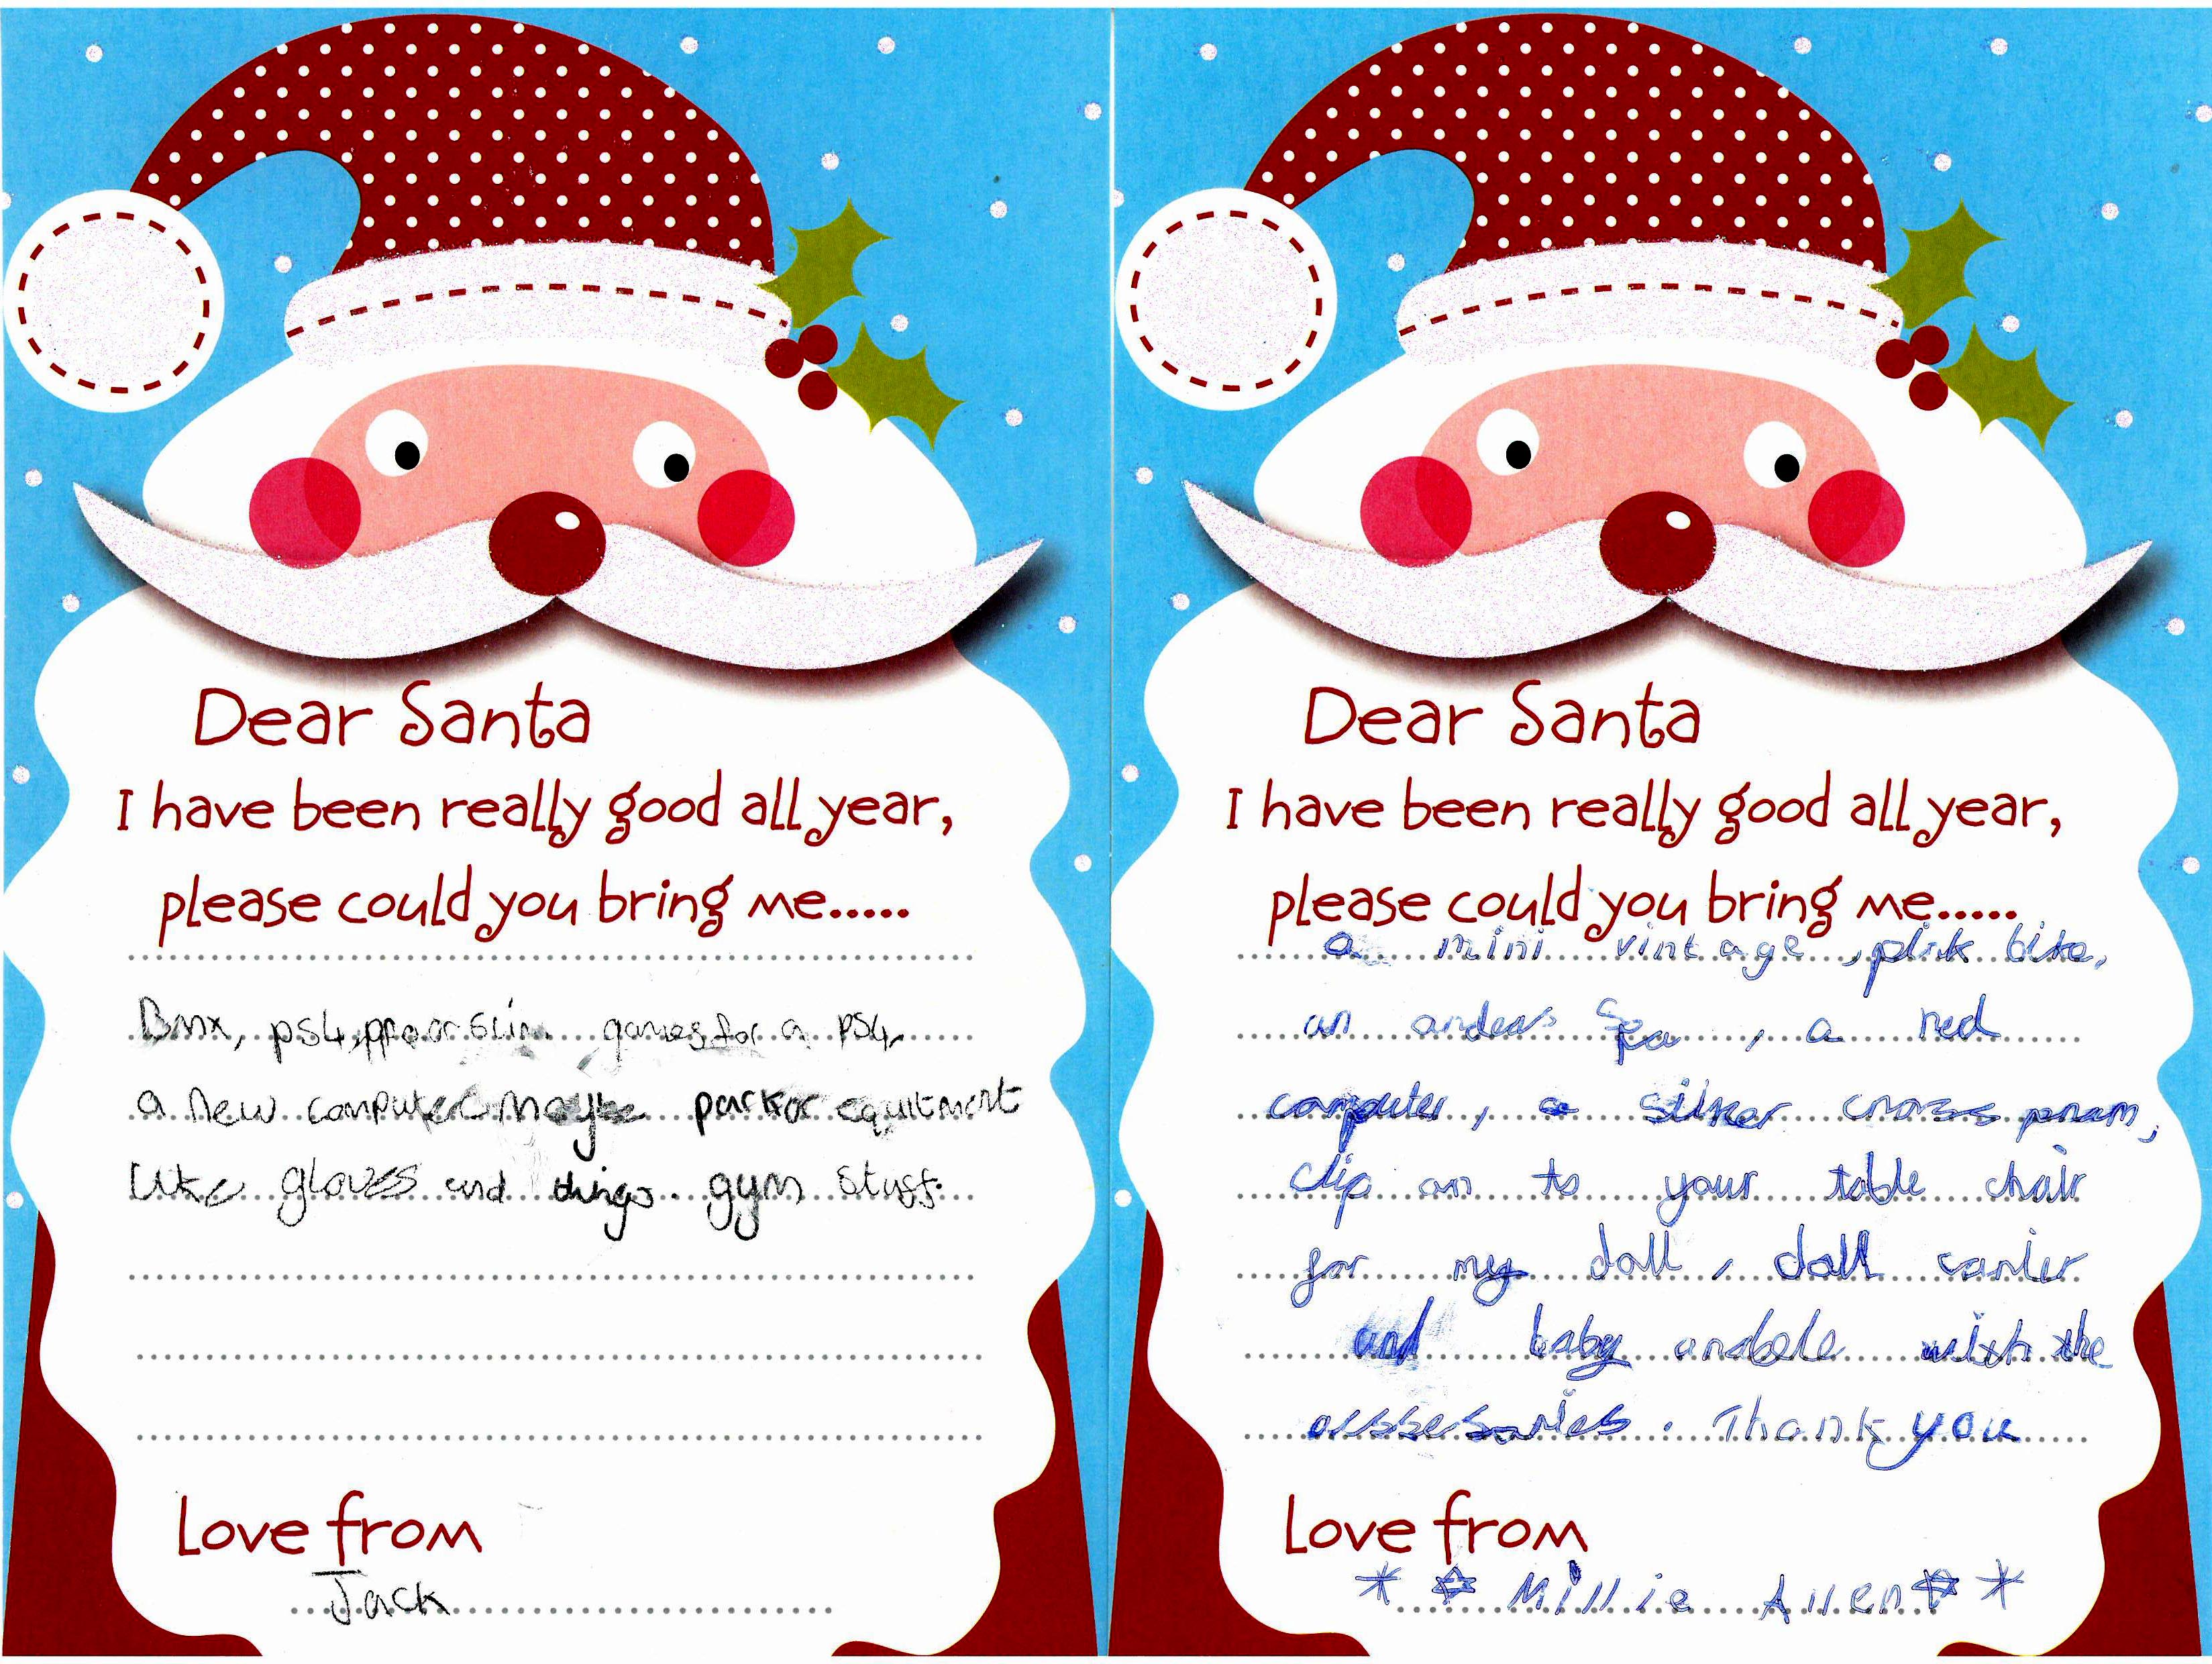 Children Forget Address on Letters to Santa